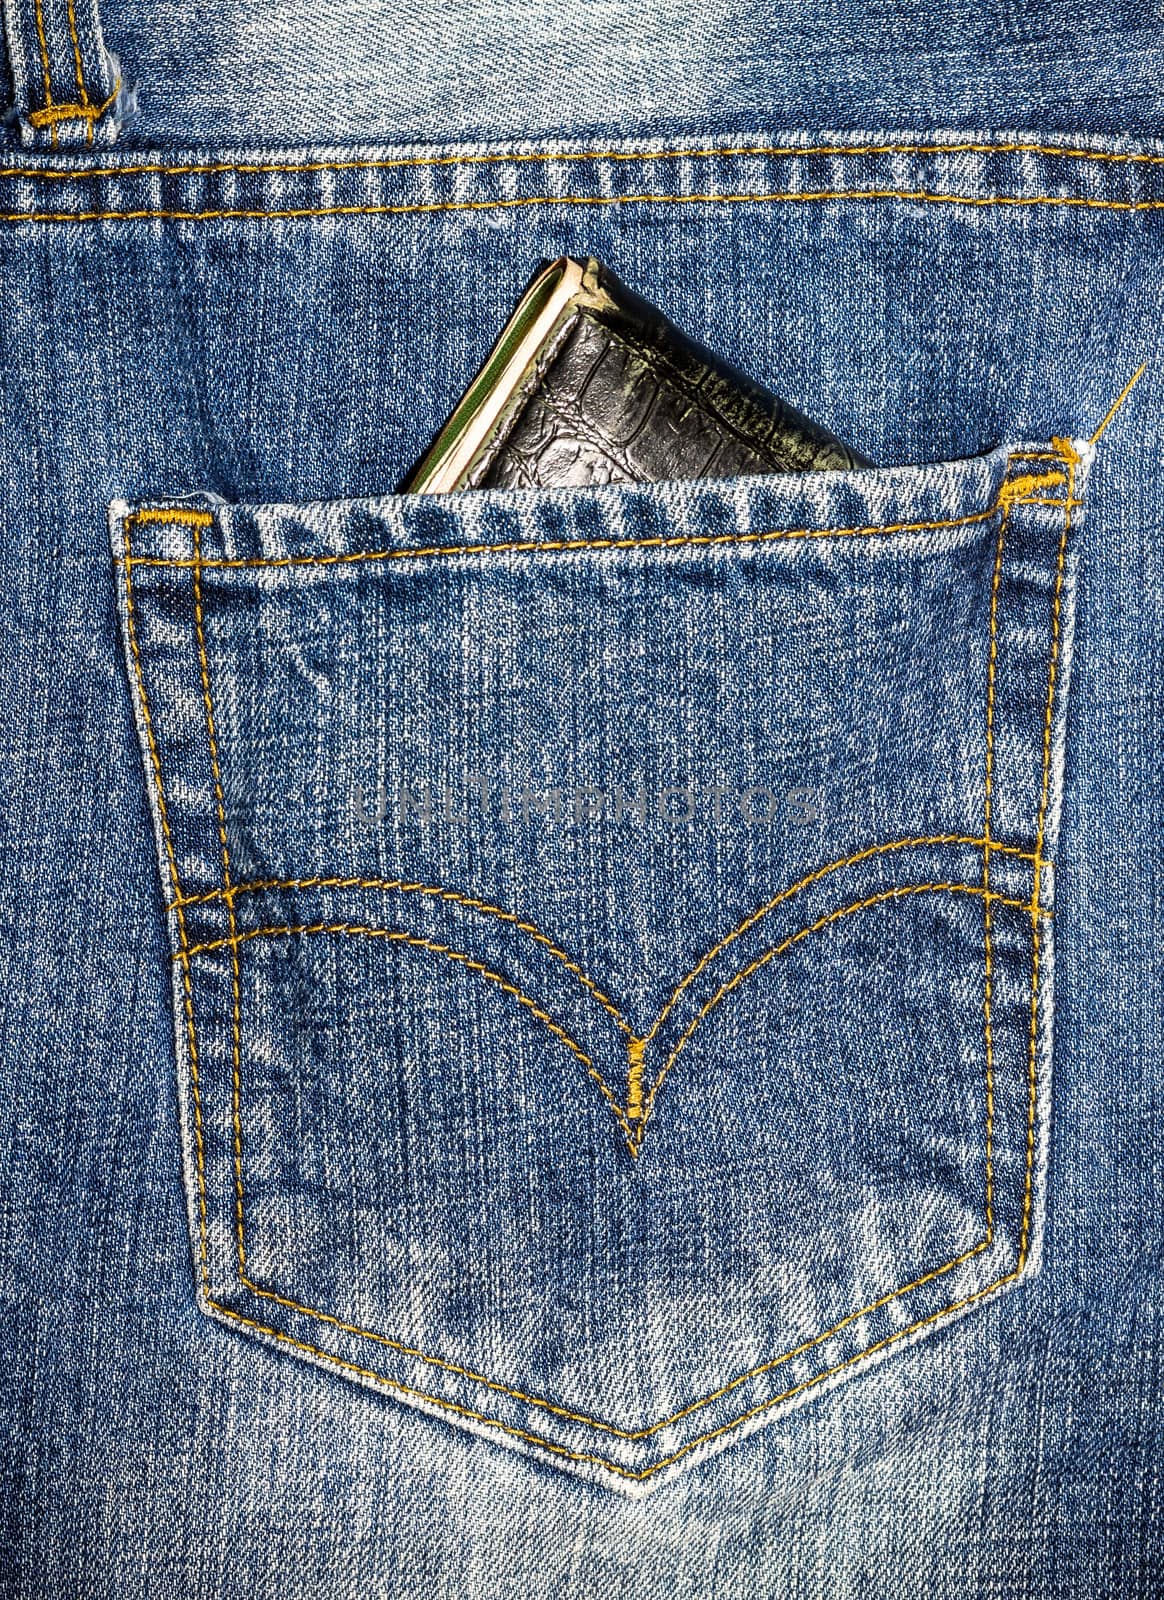 Close up blue jeans pocket with wallet.